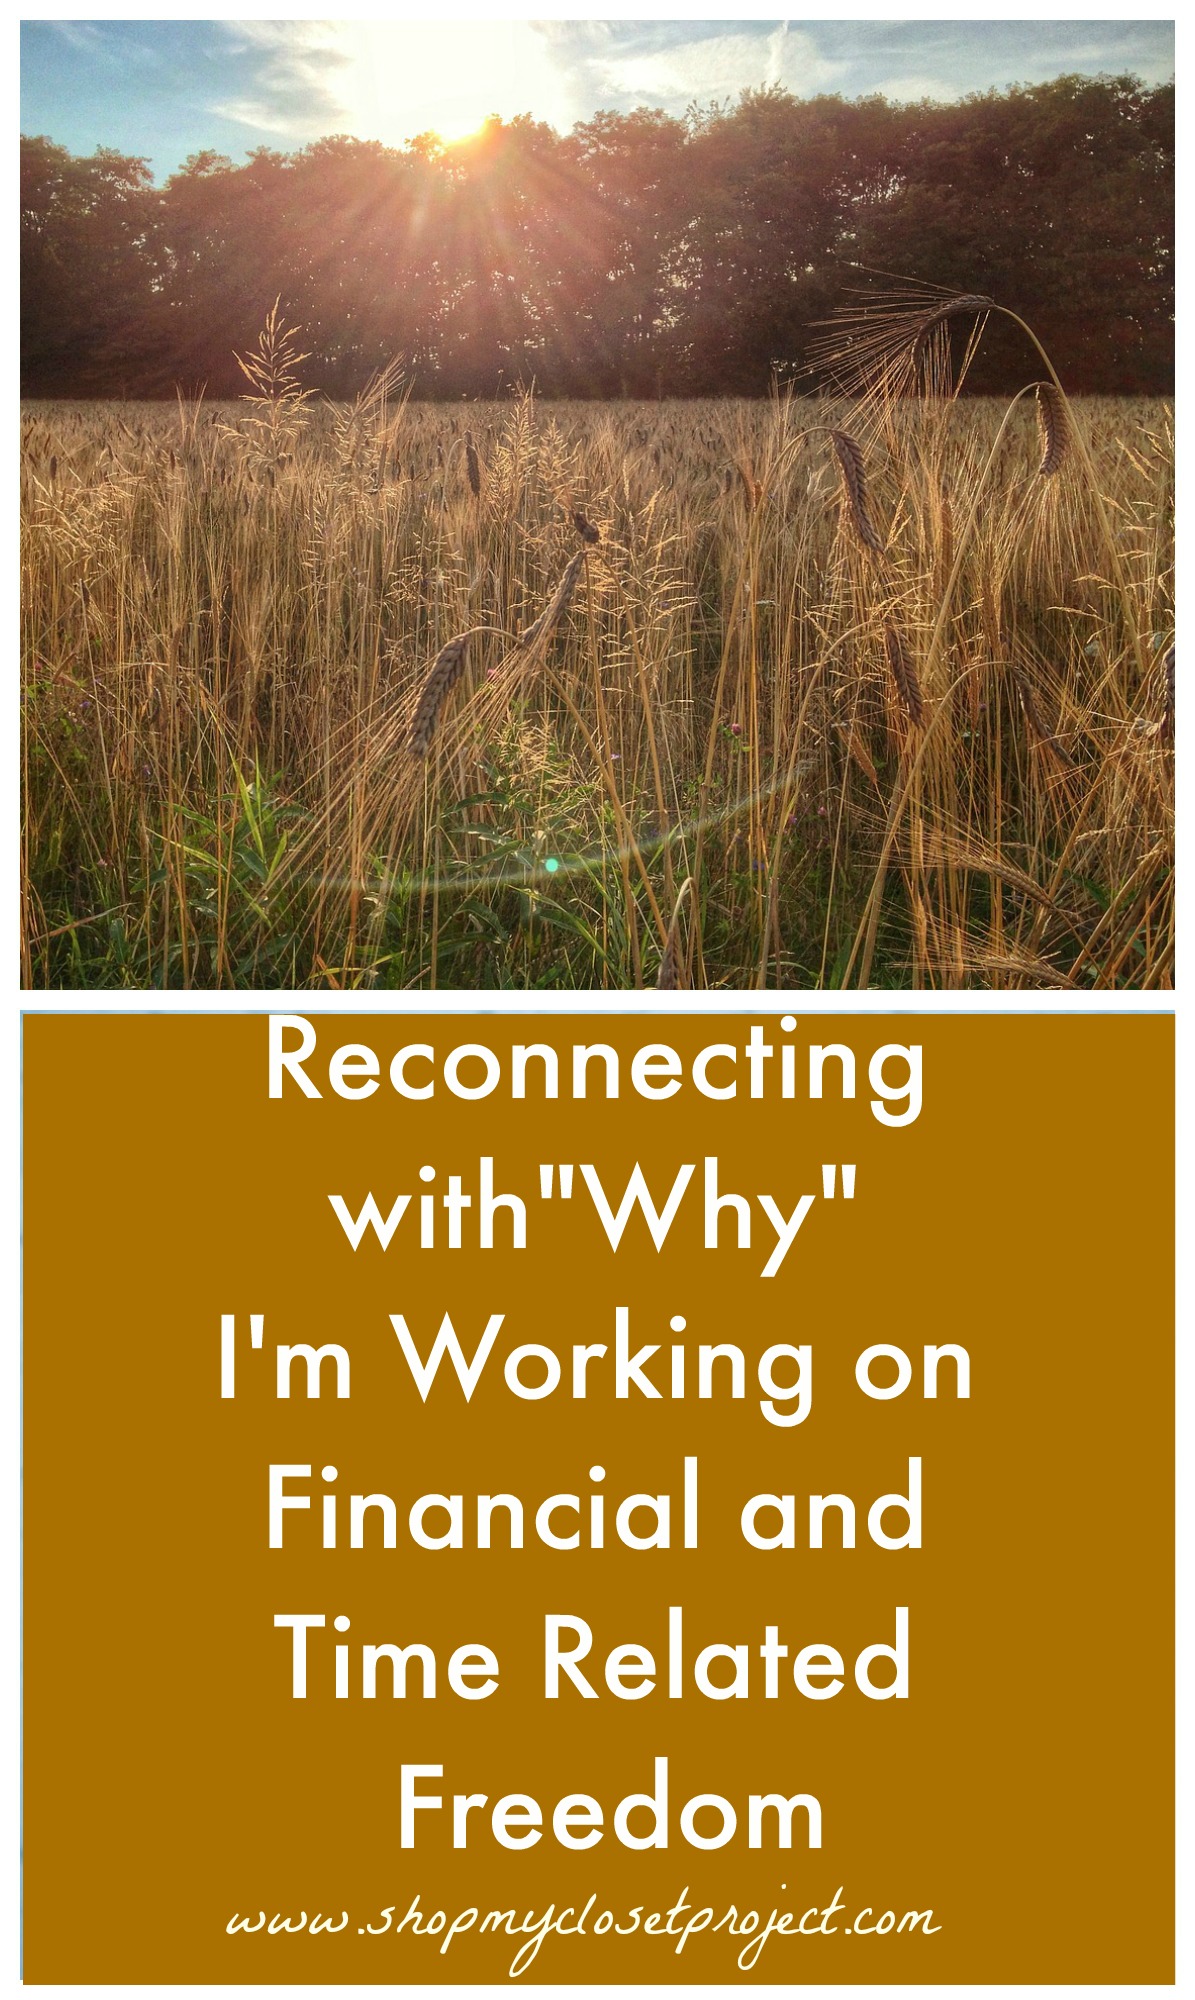 Reconnecting with”Why” I’m Working on Financial and Time Related Freedom